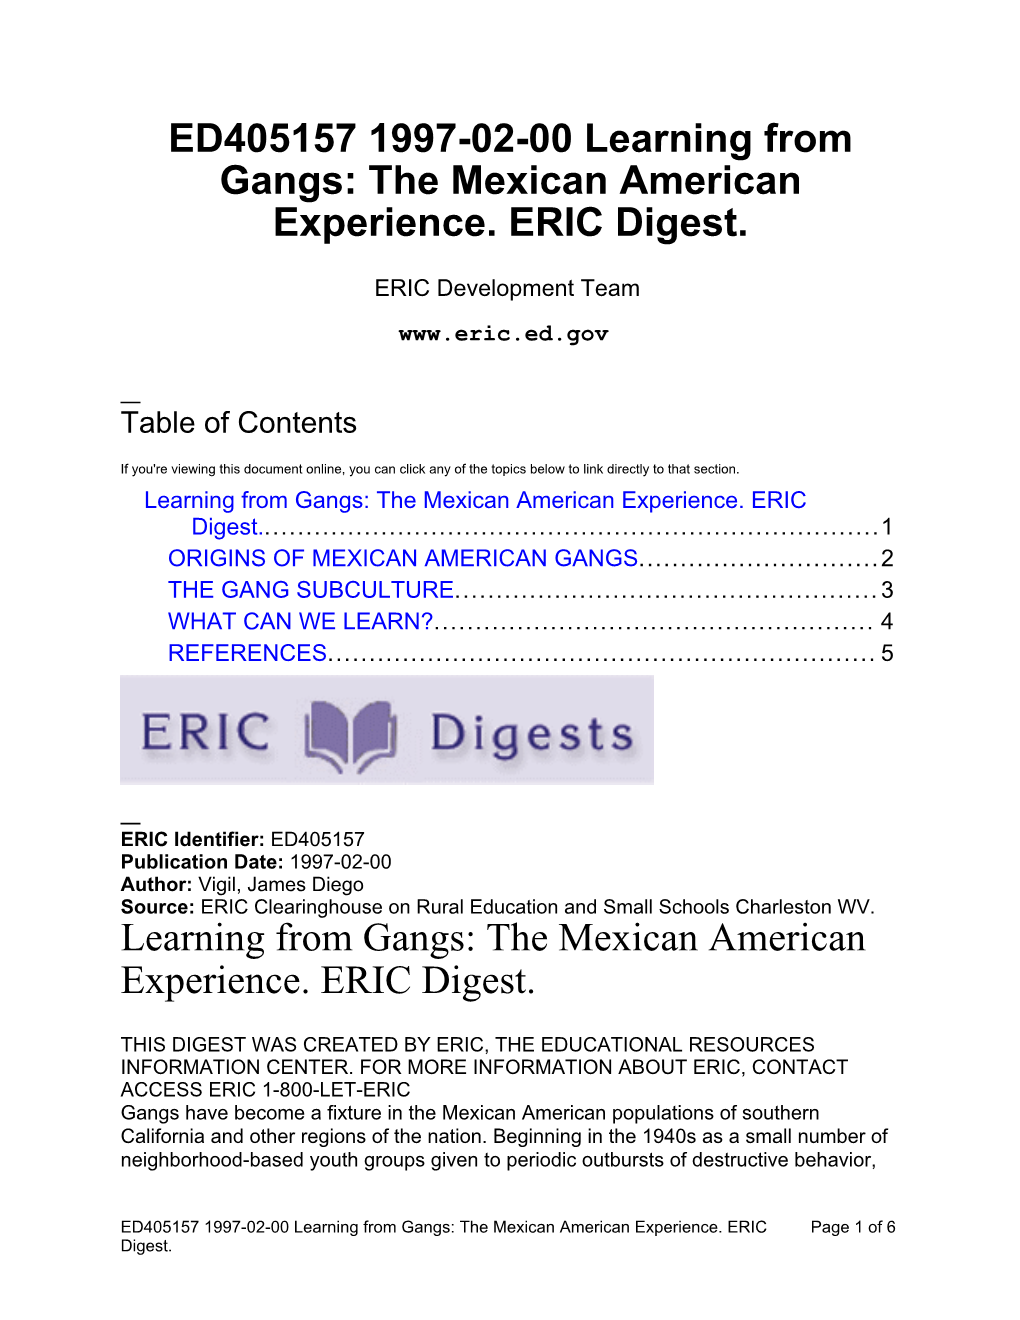 The Mexican American Experience